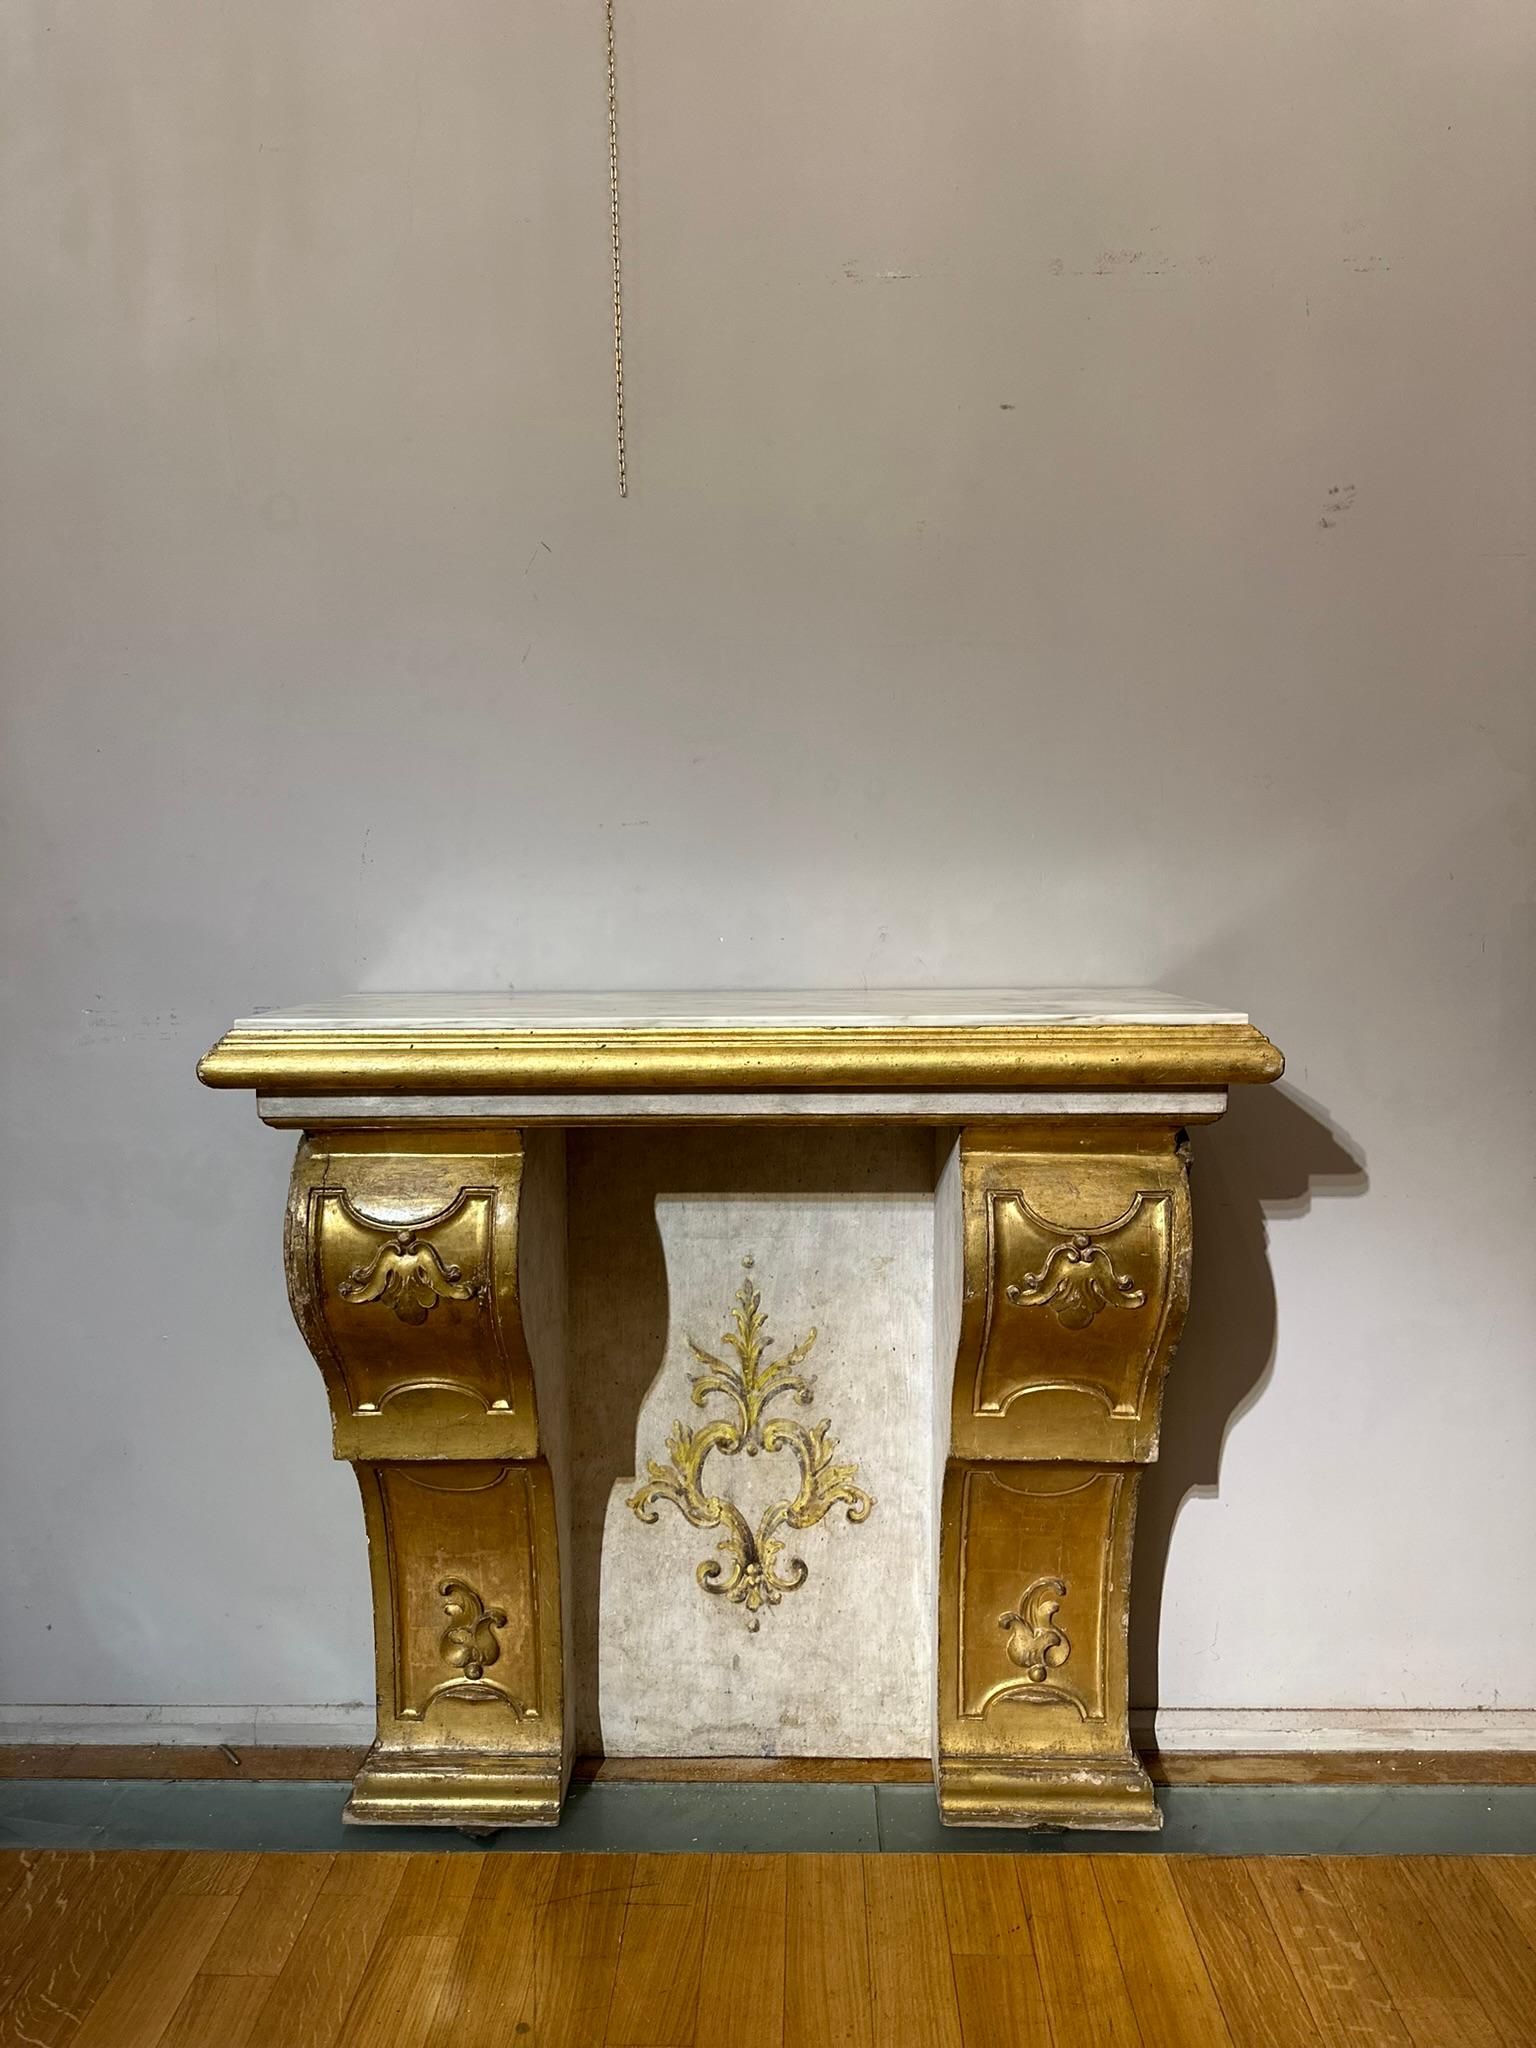 Refined altar and shelf consolle, made of carved and gilded wood. The central space is also made of carved and painted wood with a classic Louis XIV style golden decoration depicted in the centre. The console top is in Carrara marble. The